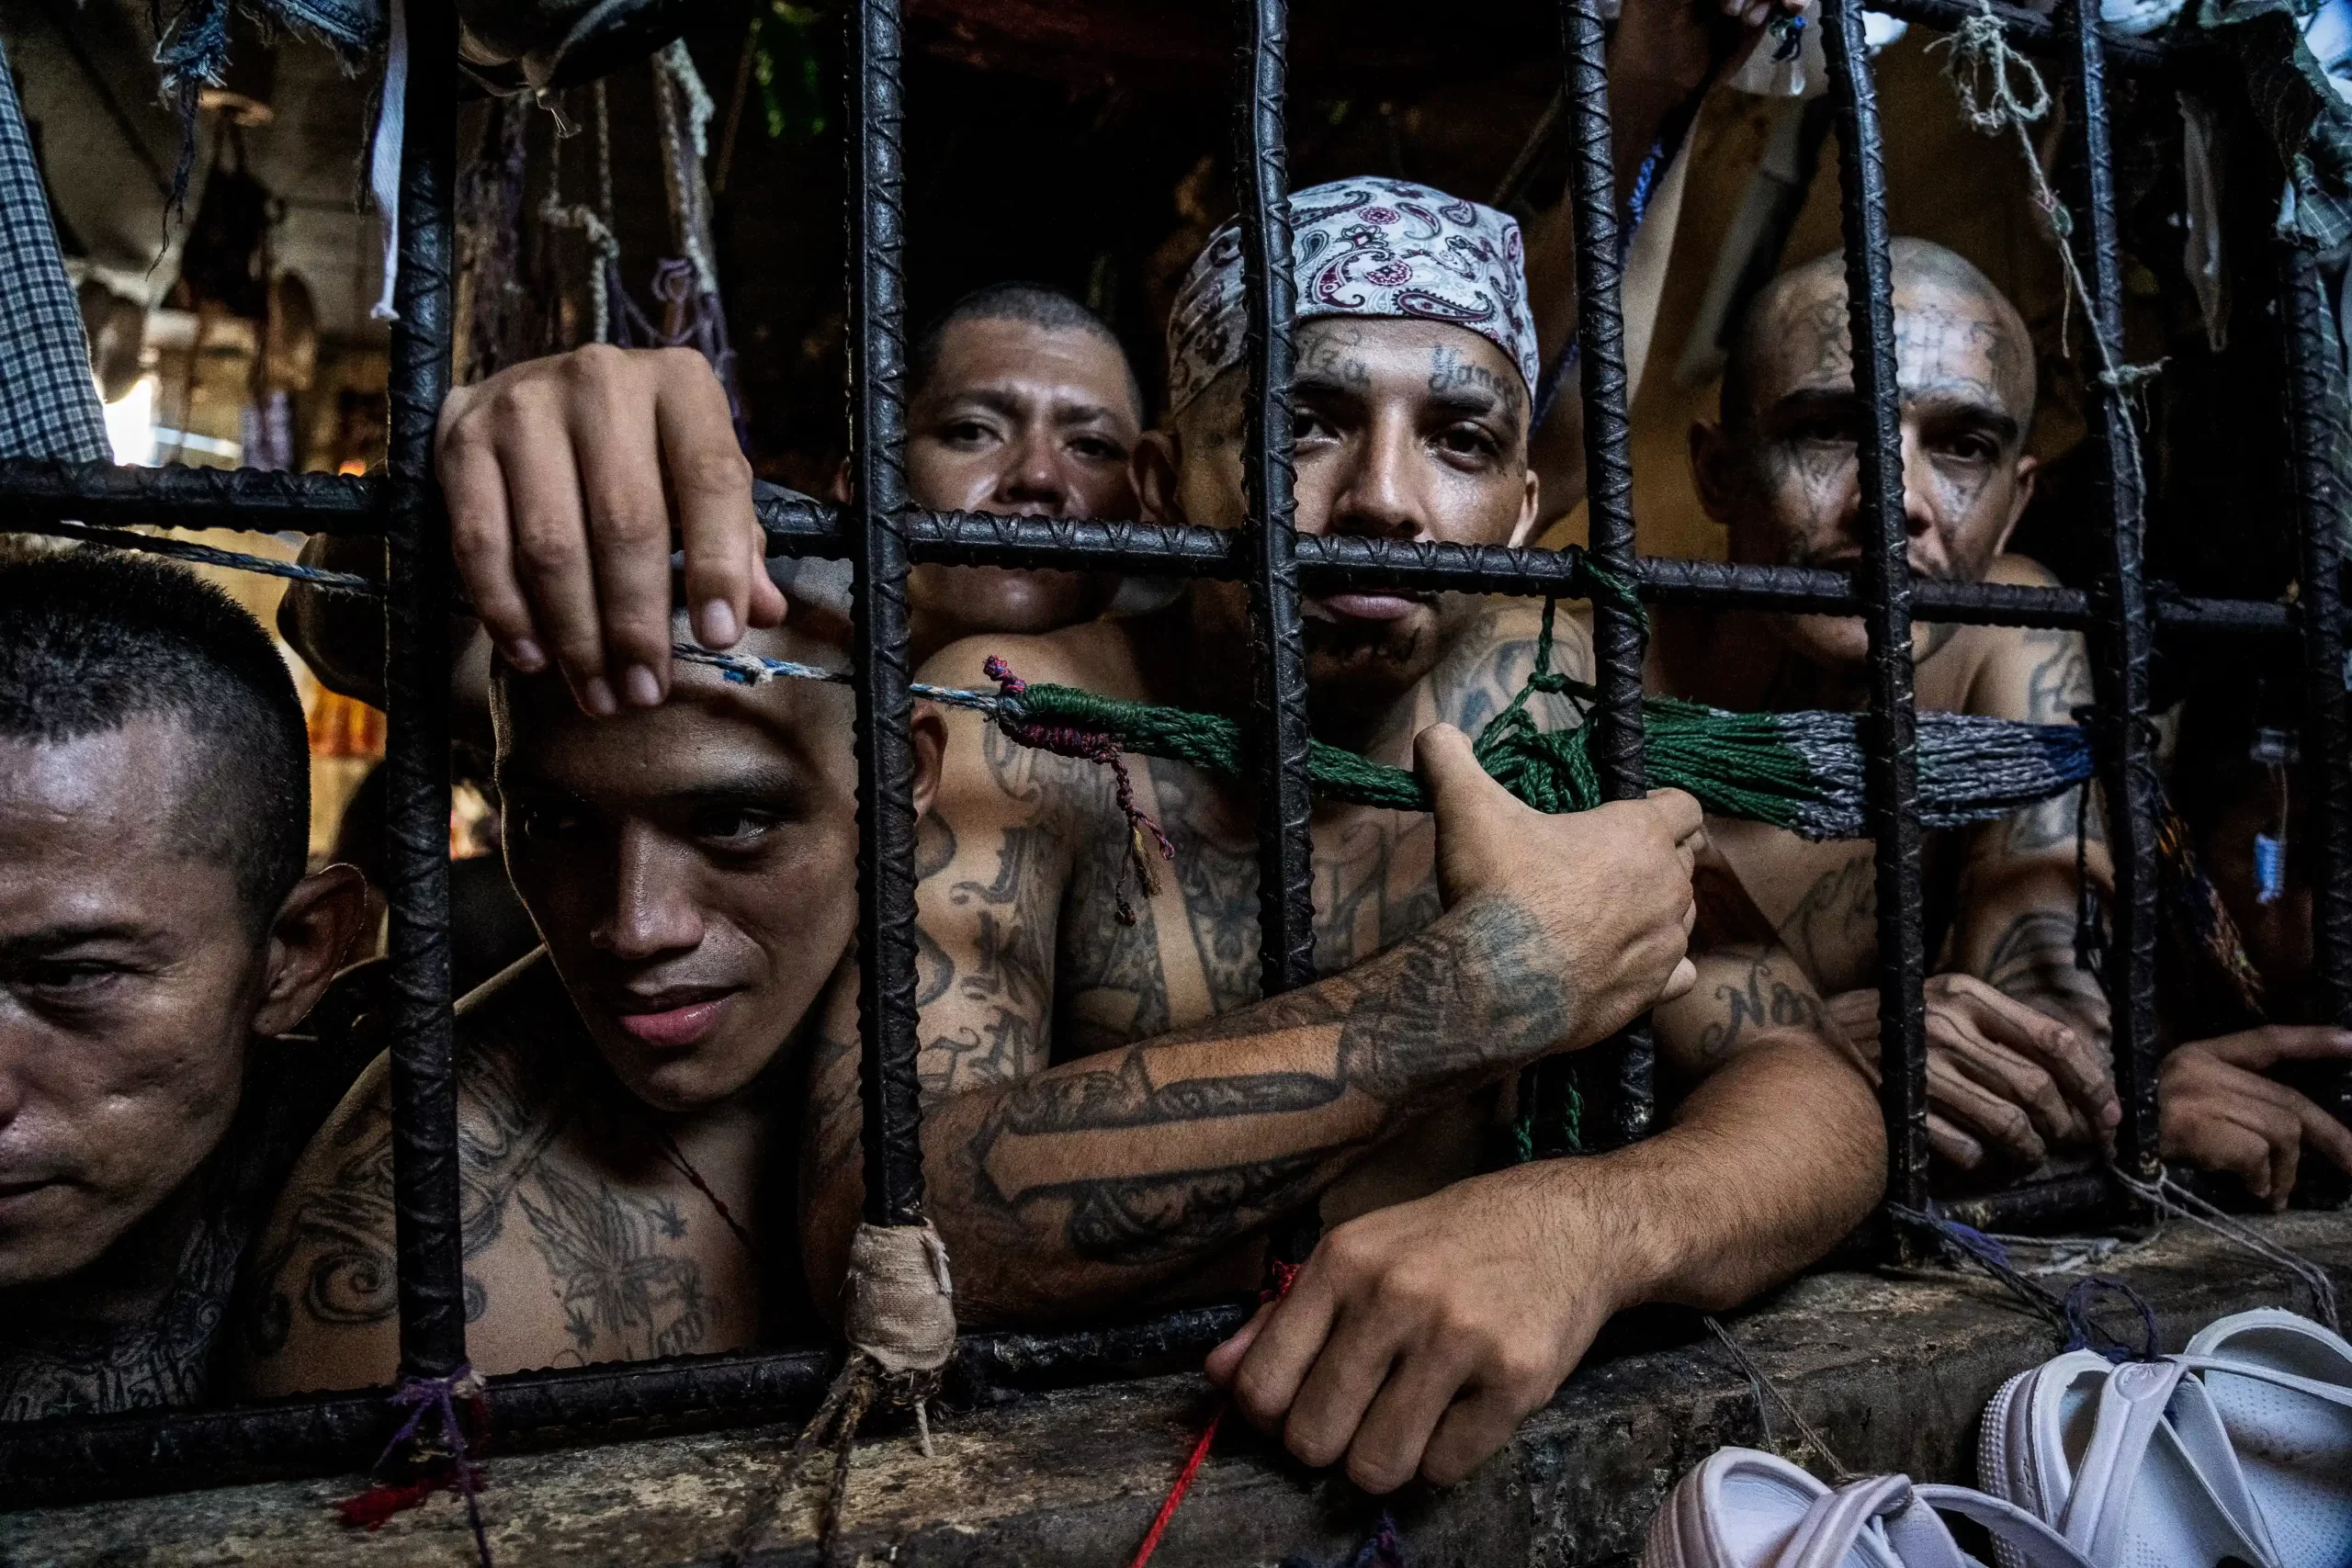 EL SALVADOR AND GANG WARS: WHAT IS THE GOVERNMENT DOING?